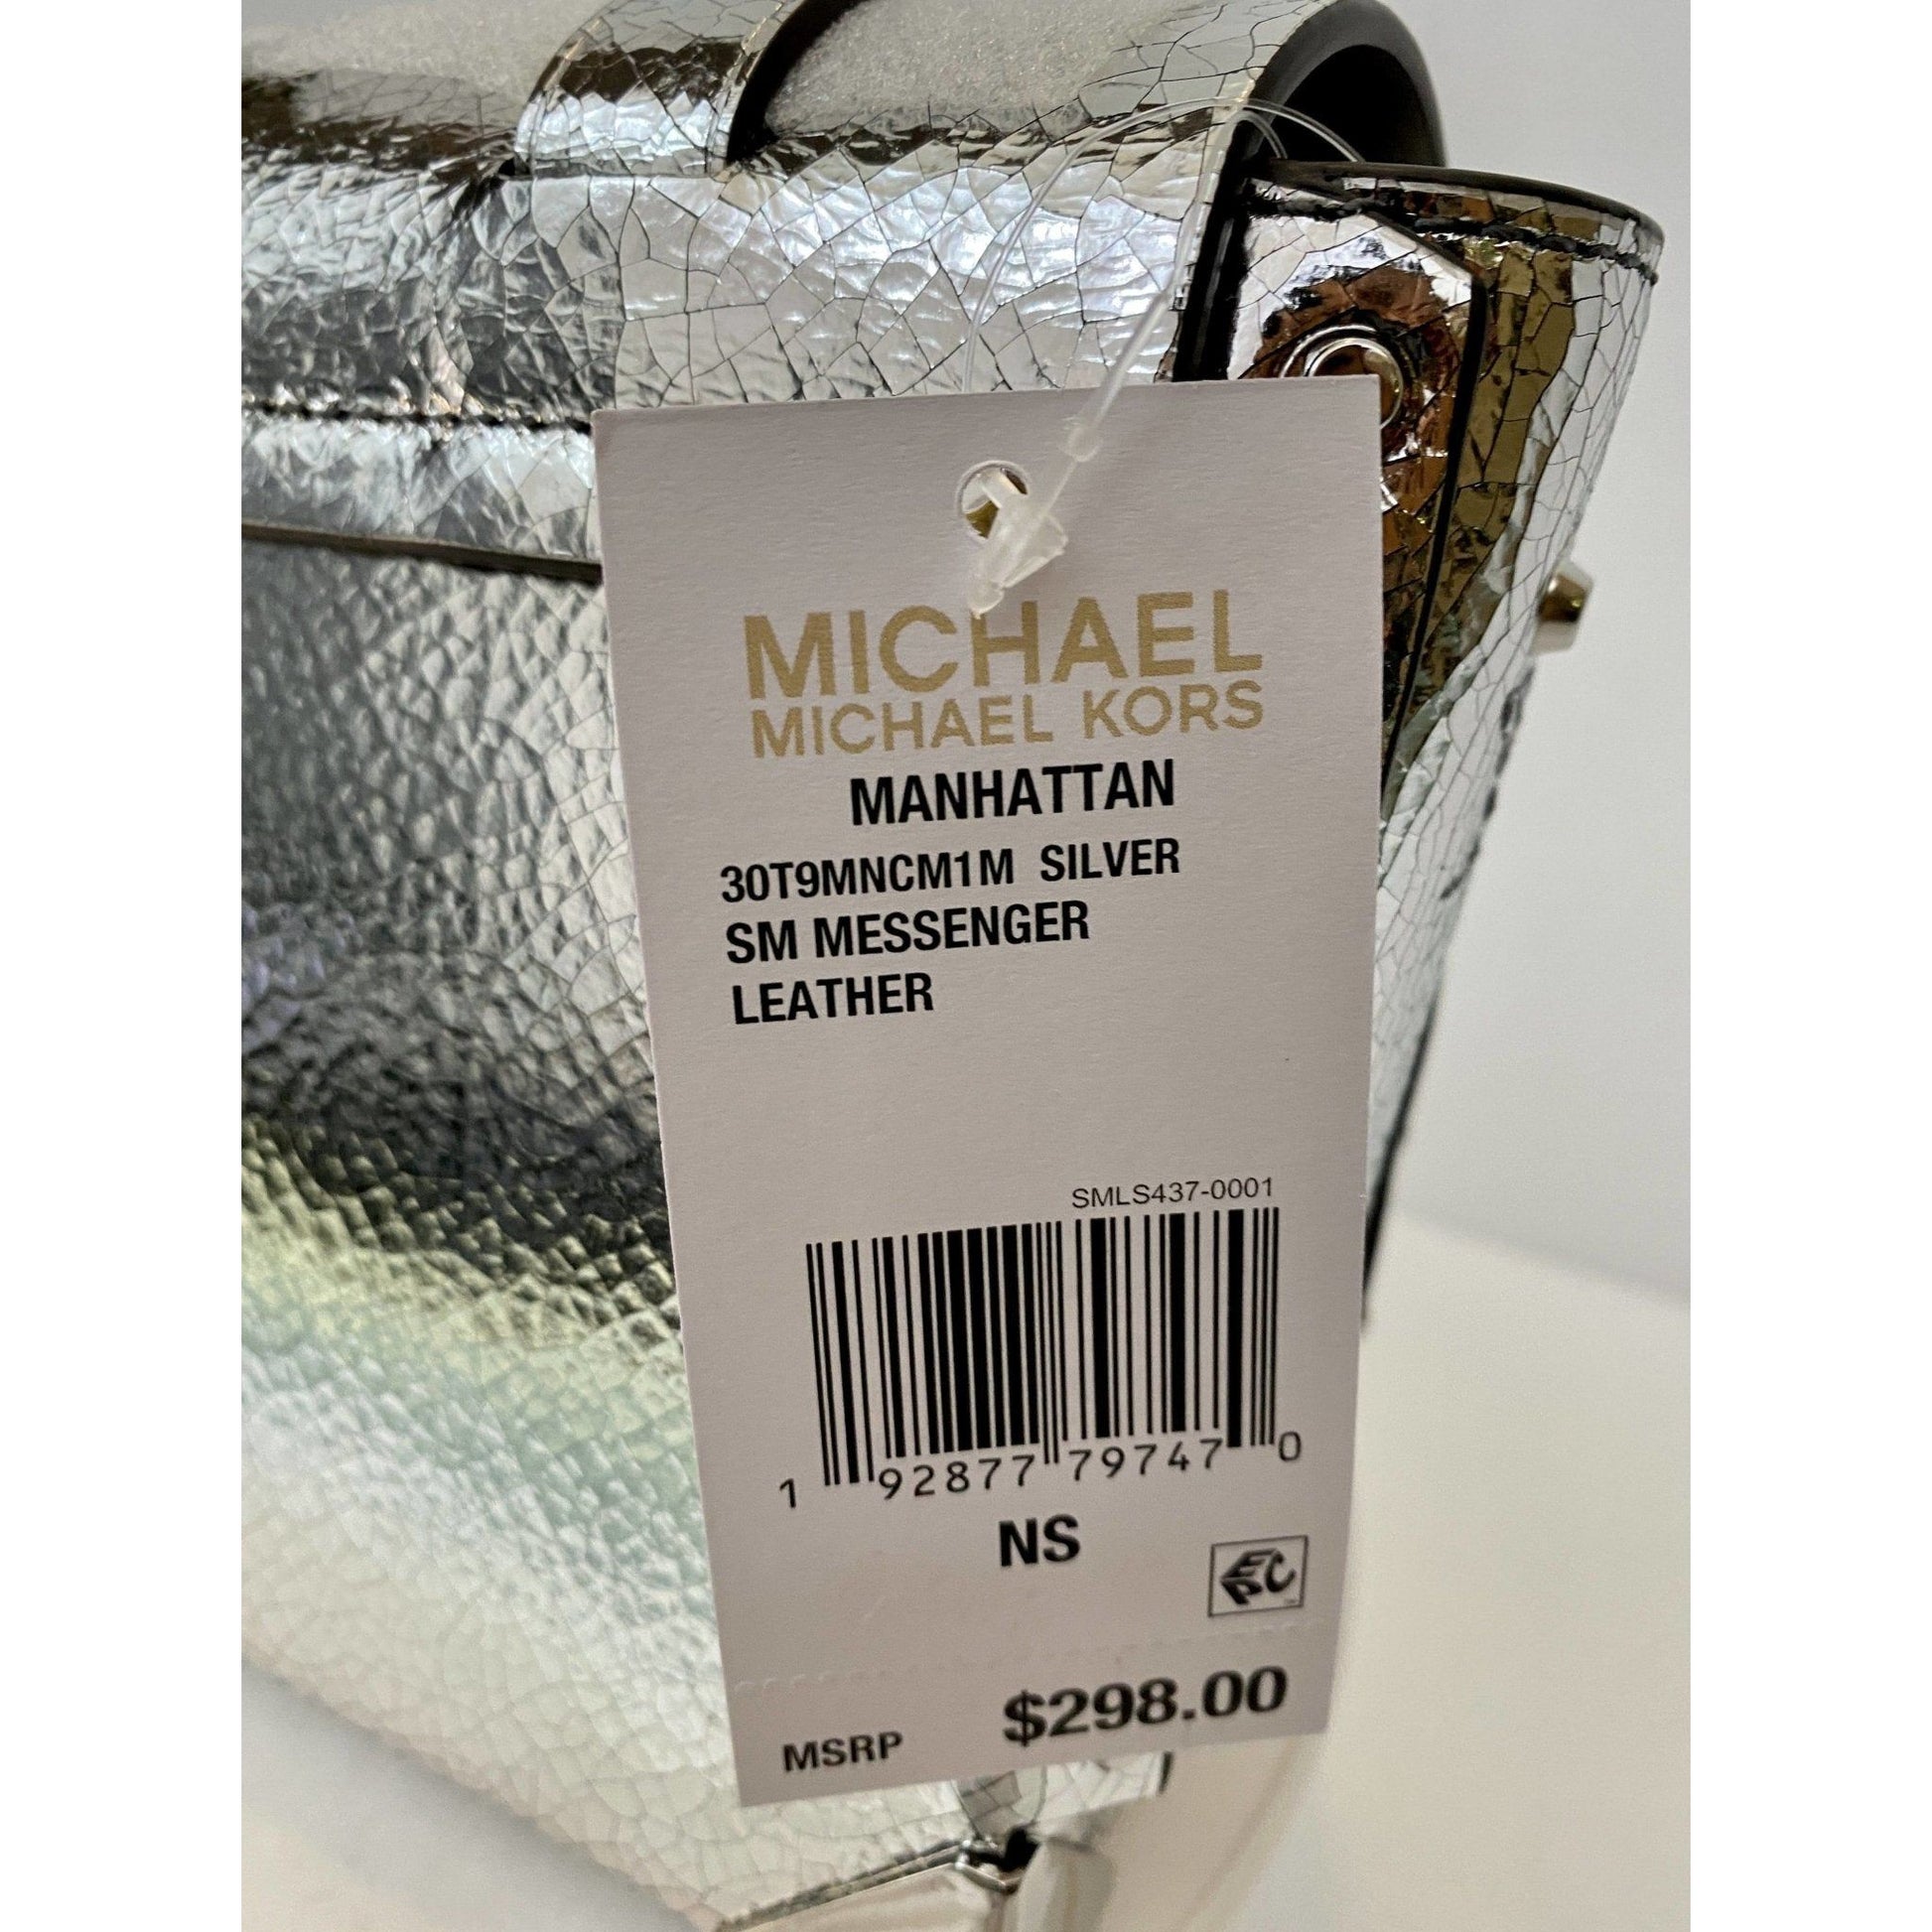 NEW Michael Kors Manhattan Small or MD Silver Crackled Leather Not an  outlet bag